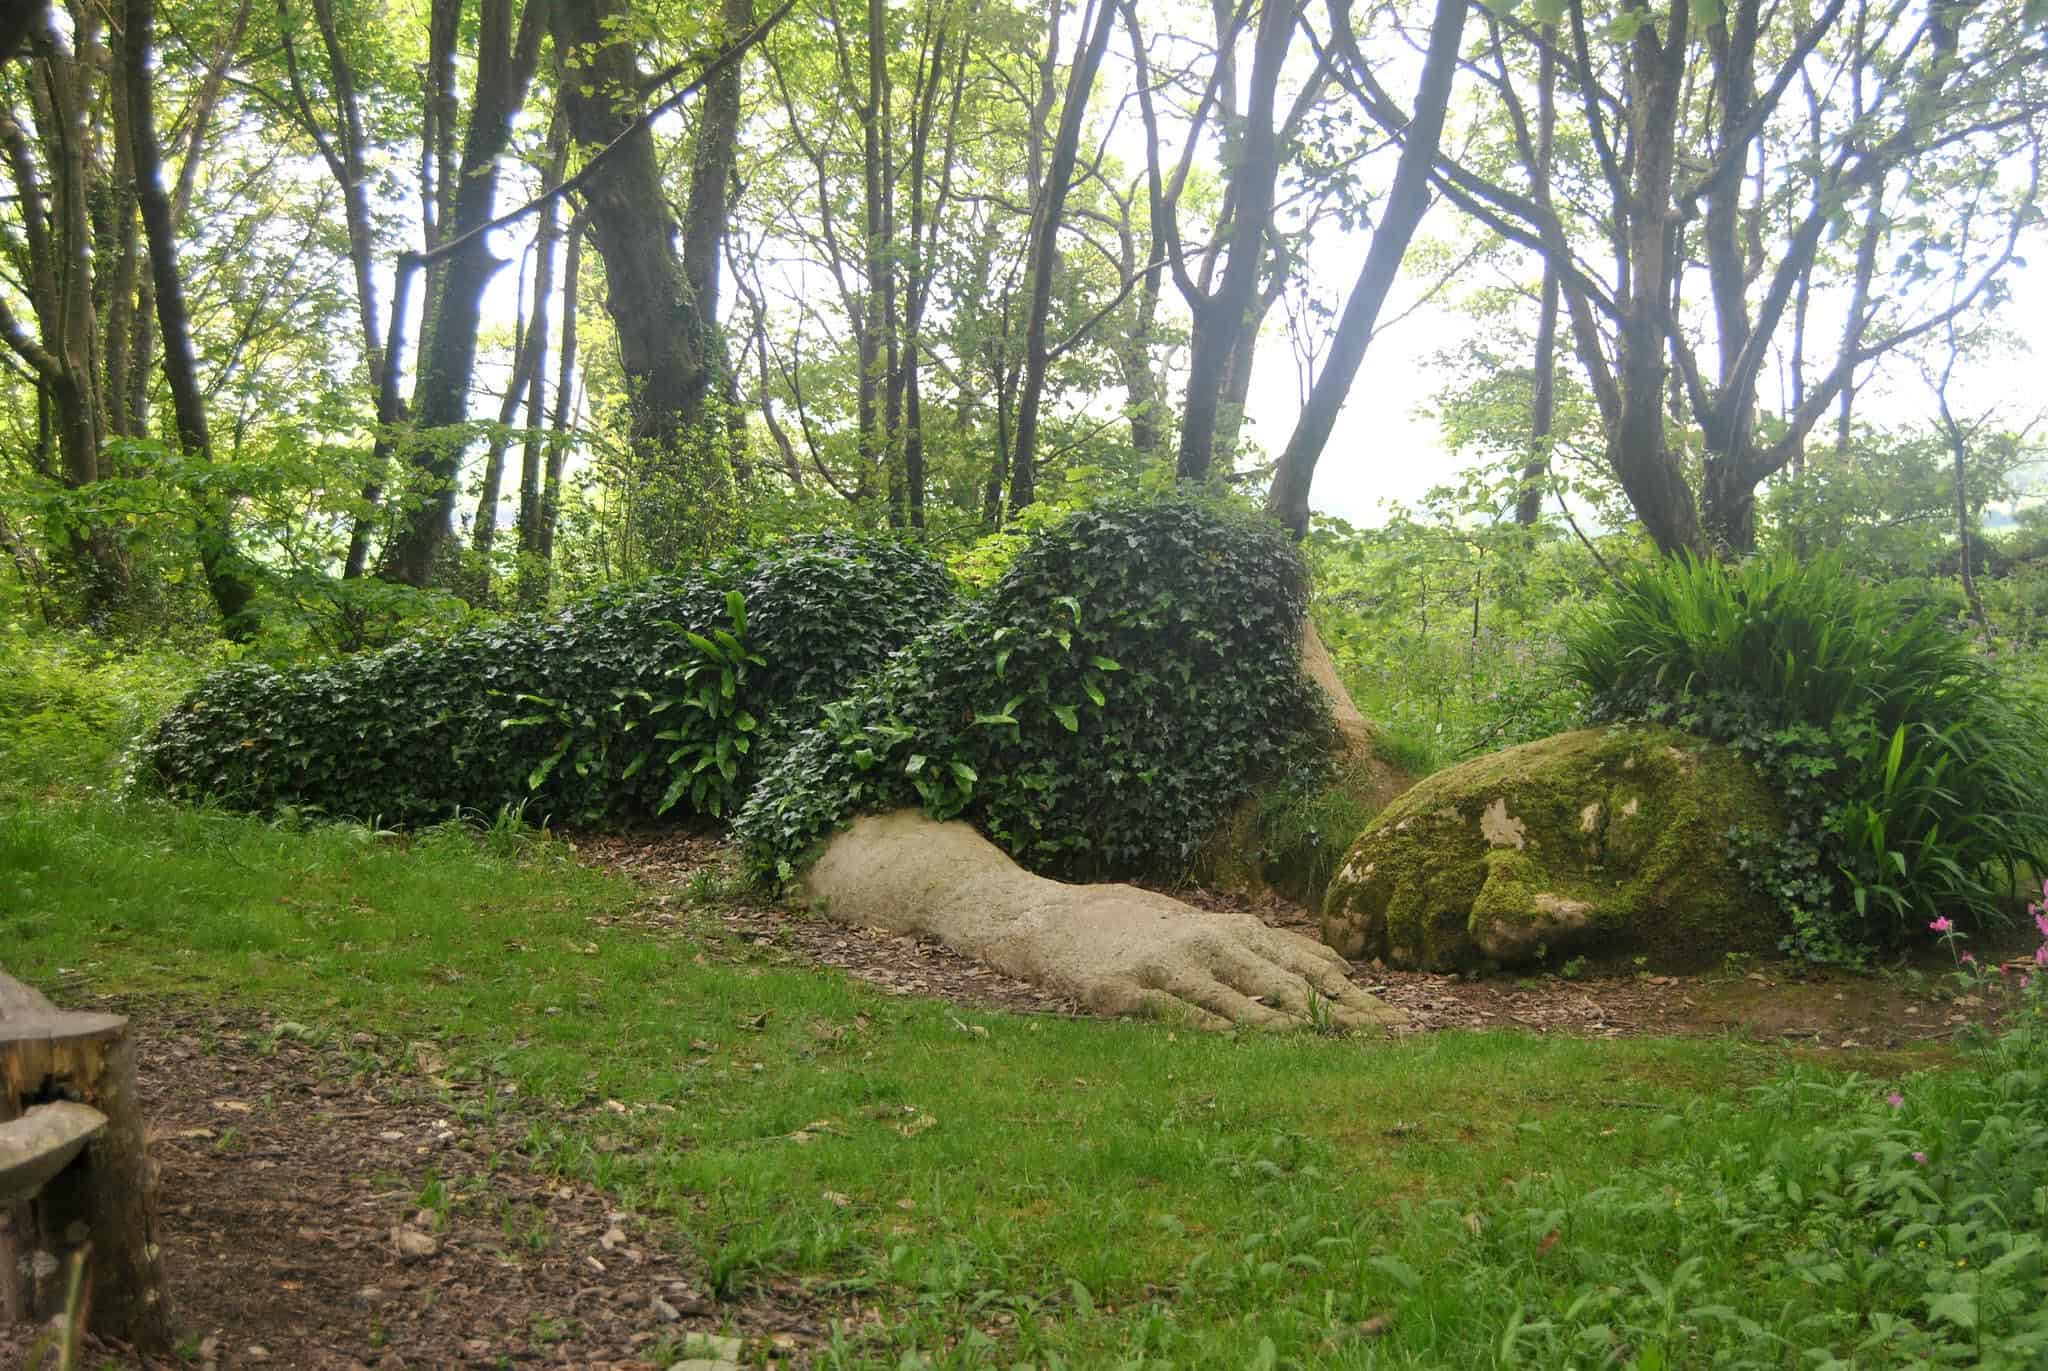 "SLEEPING GODDESS AT THE LOST GARDENS OF HELIGAN" by Loco Steve is licensed with CC BY-SA 2.0.